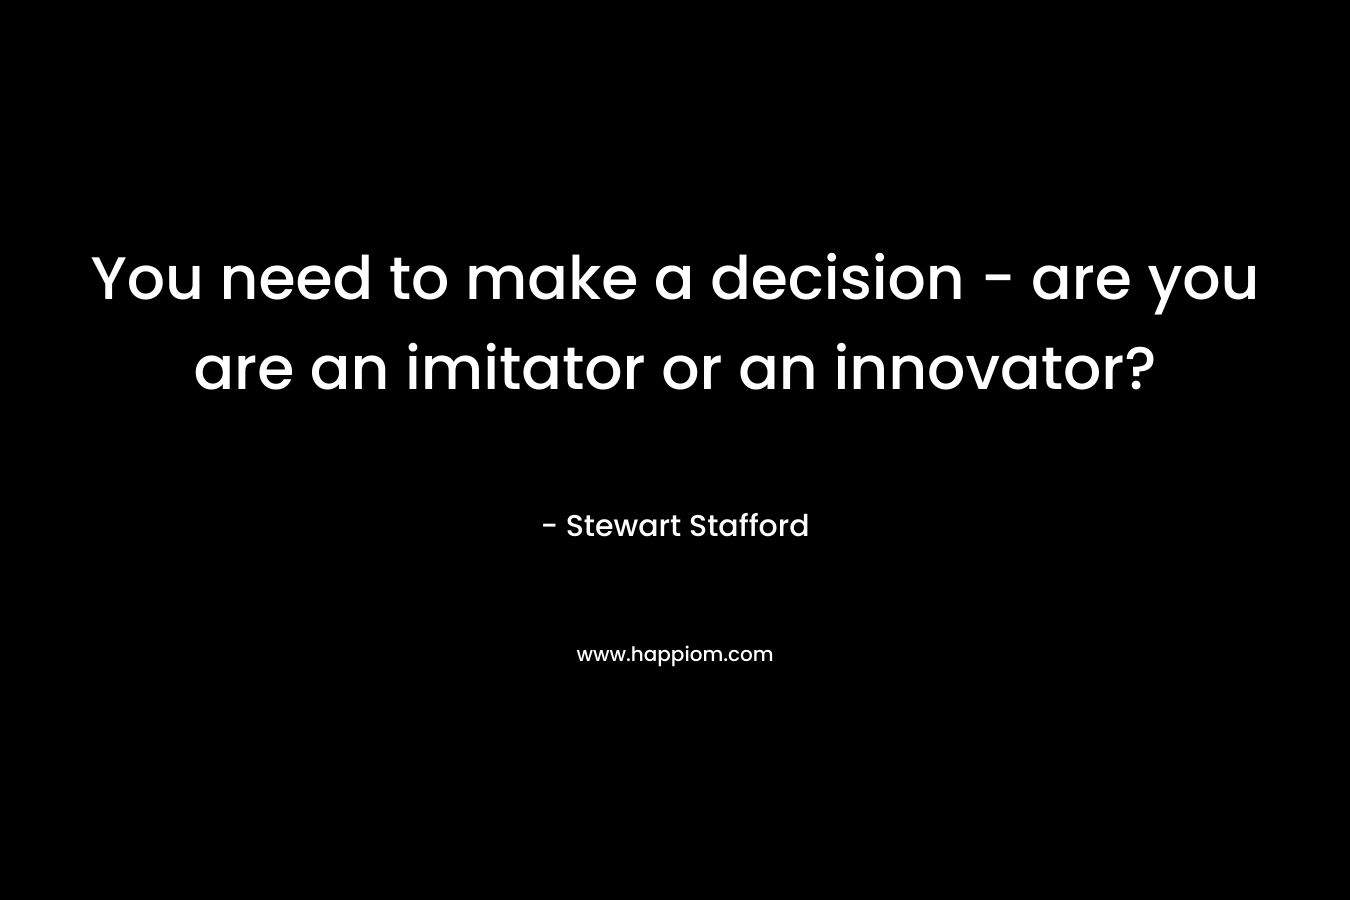 You need to make a decision - are you are an imitator or an innovator?